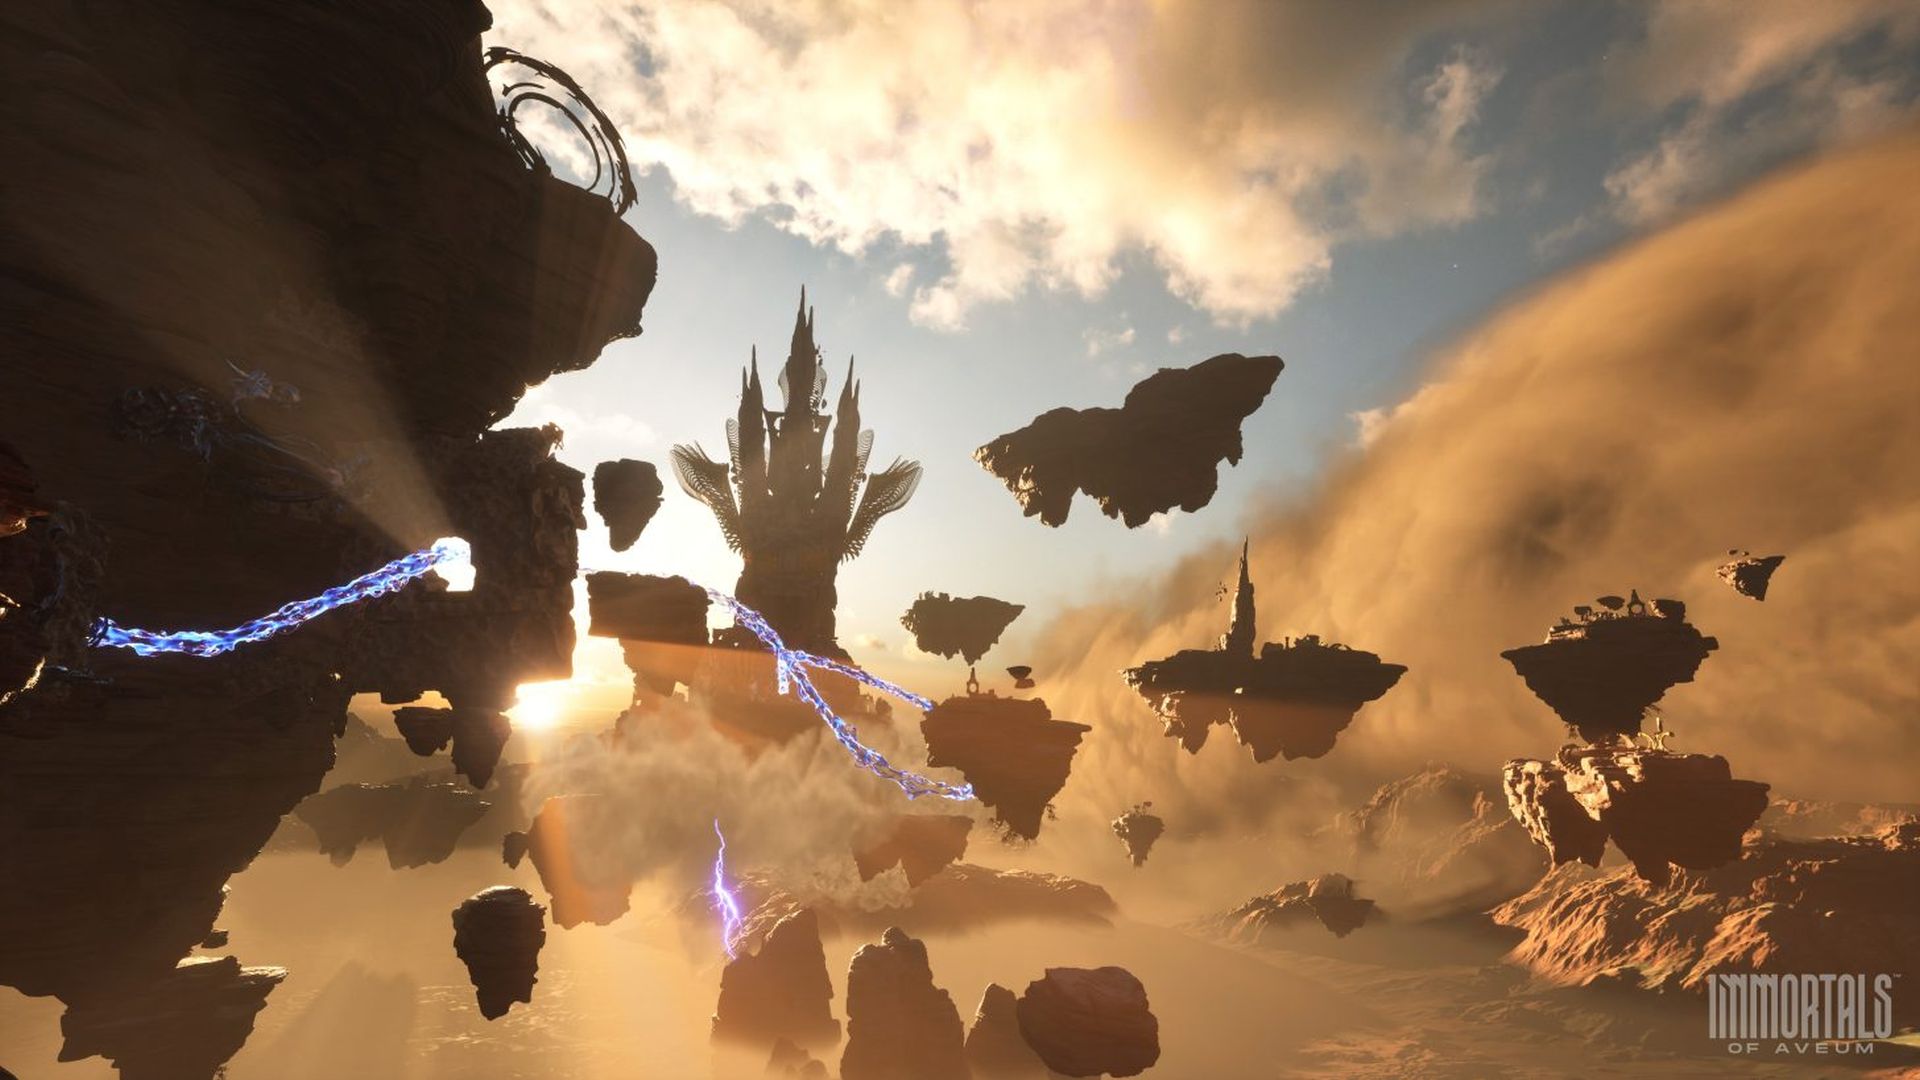 Immortals of Aveum Features 12 Biomes, 3 Hubs, and Forges for Acquiring Gear